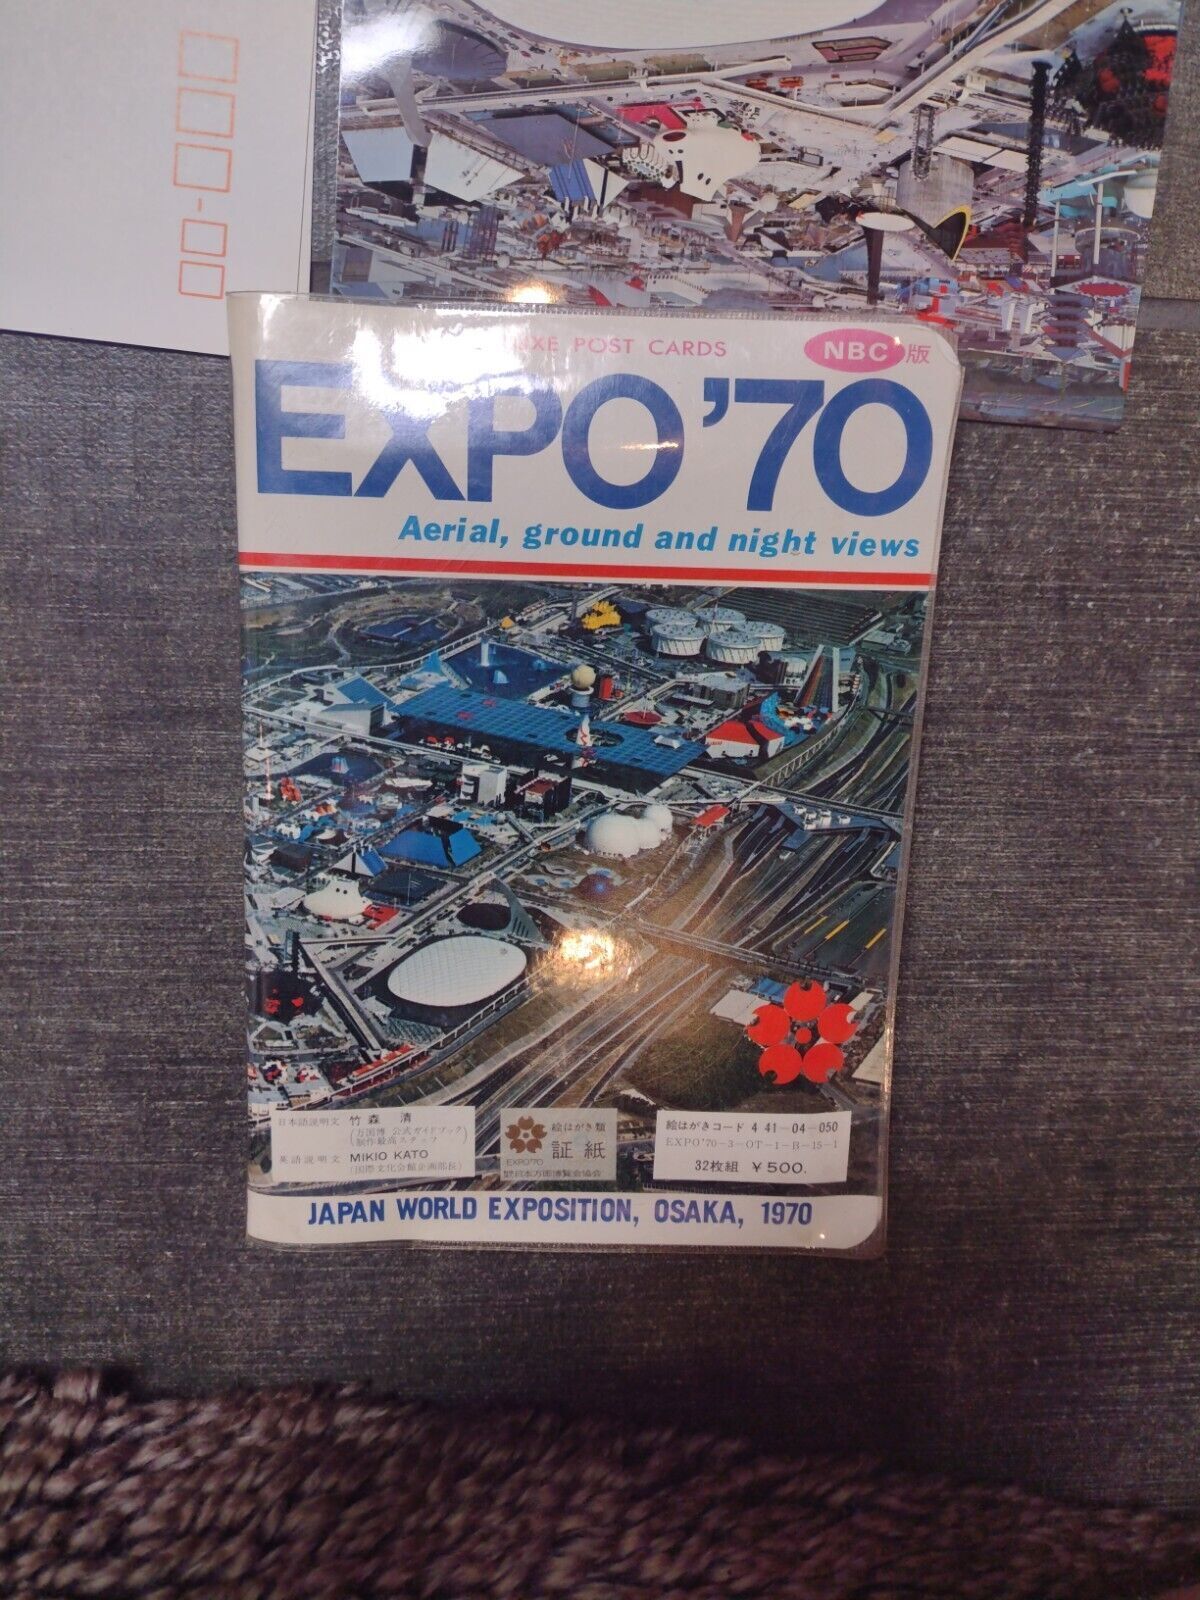 Expo '70 Osaka Japan World Exposition Official postcards